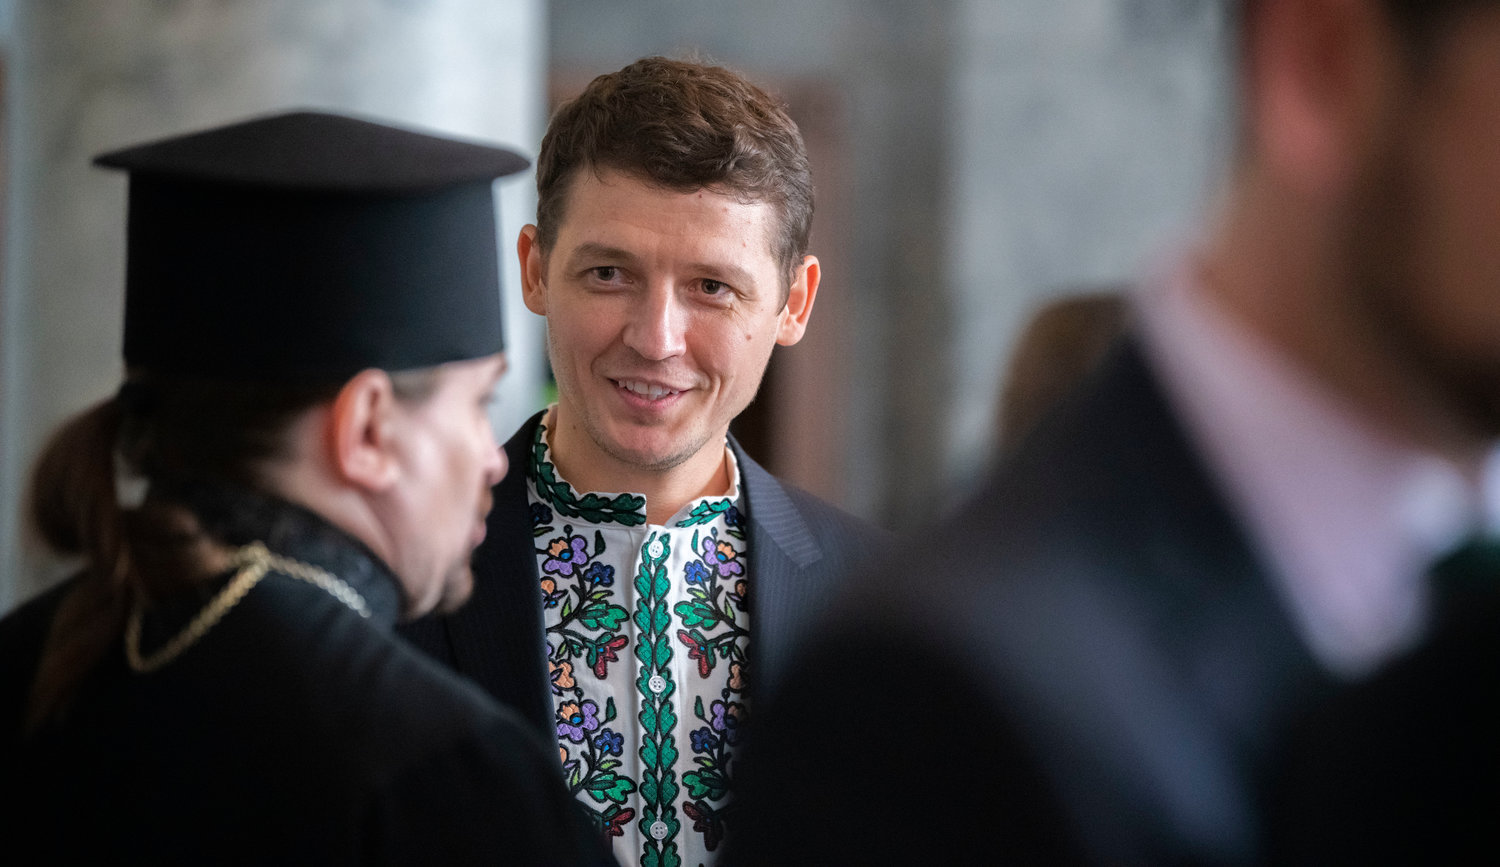 Minister of Foreign Affairs of Ukraine Valeriy Goloborodko, Honor Consul of Ukraine in Seattle, smiles while talking to Father Andriy Matlak of Seattle’s Ukrainian Orthodox Church following the 2023 State of the State speech inside the House Chambers Tuesday in Olympia.